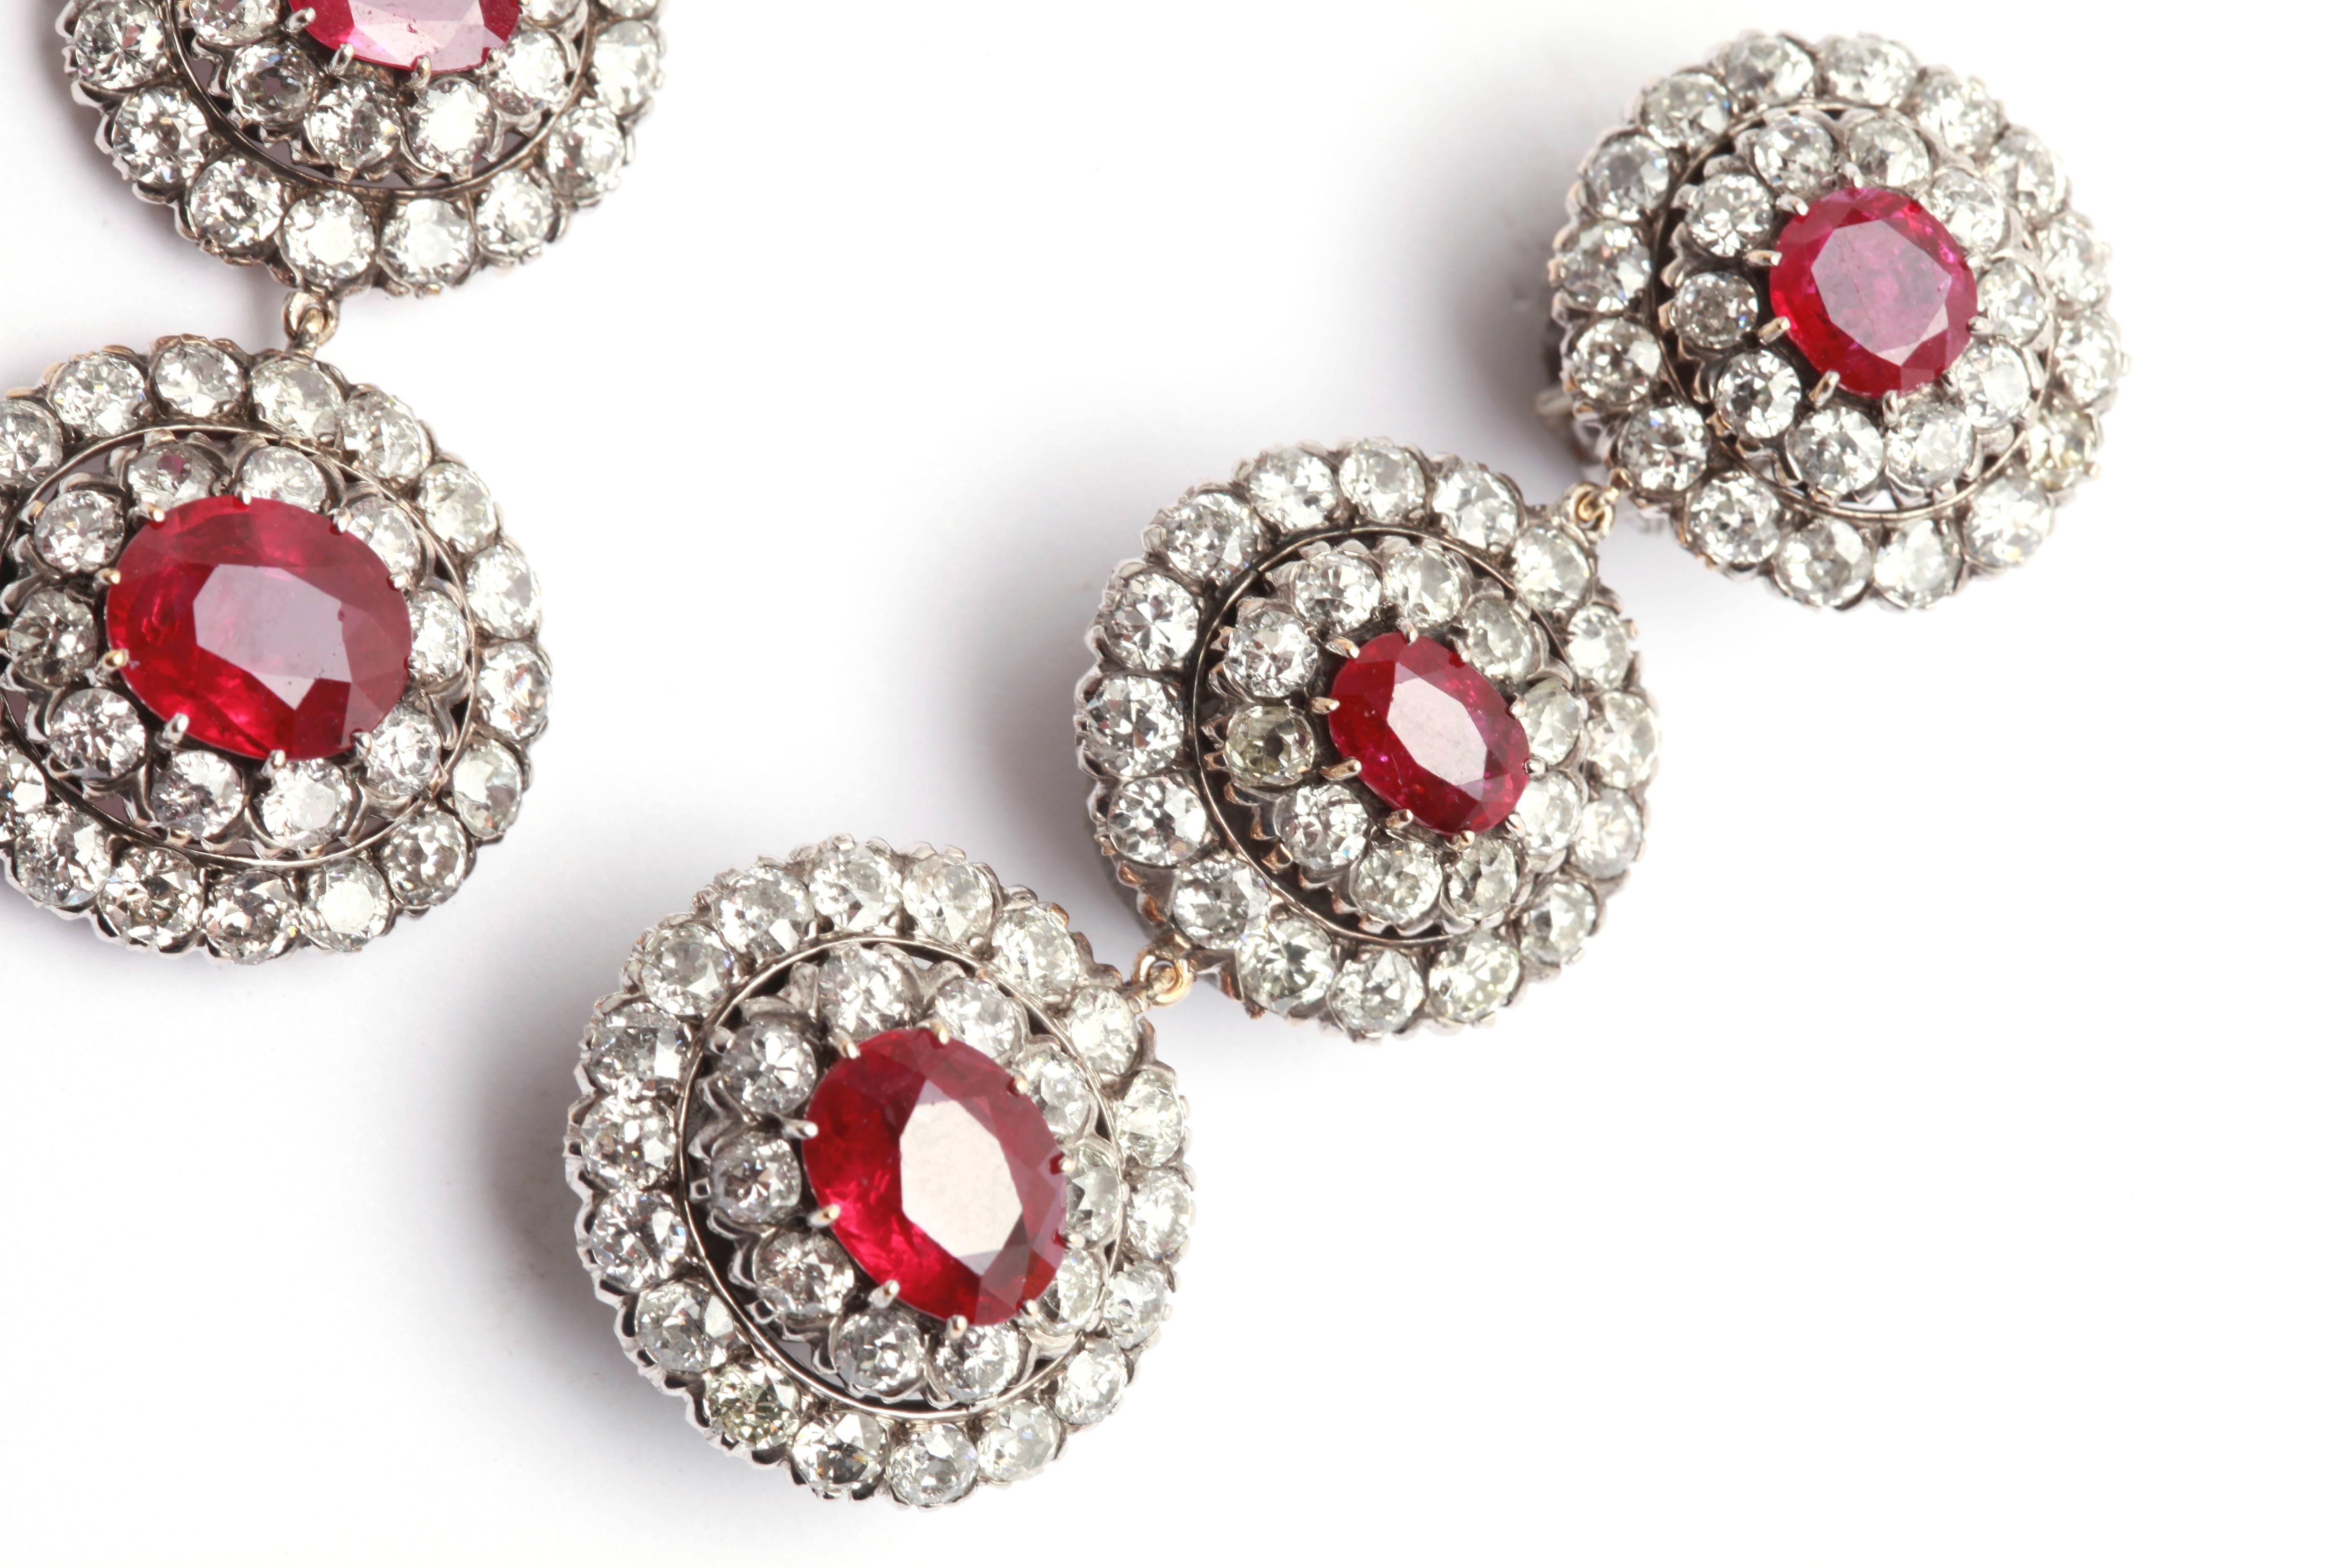 An important pair of fine Burmese rubies and old cut diamond ear pendants, mounted in platinum, circa 1930. 